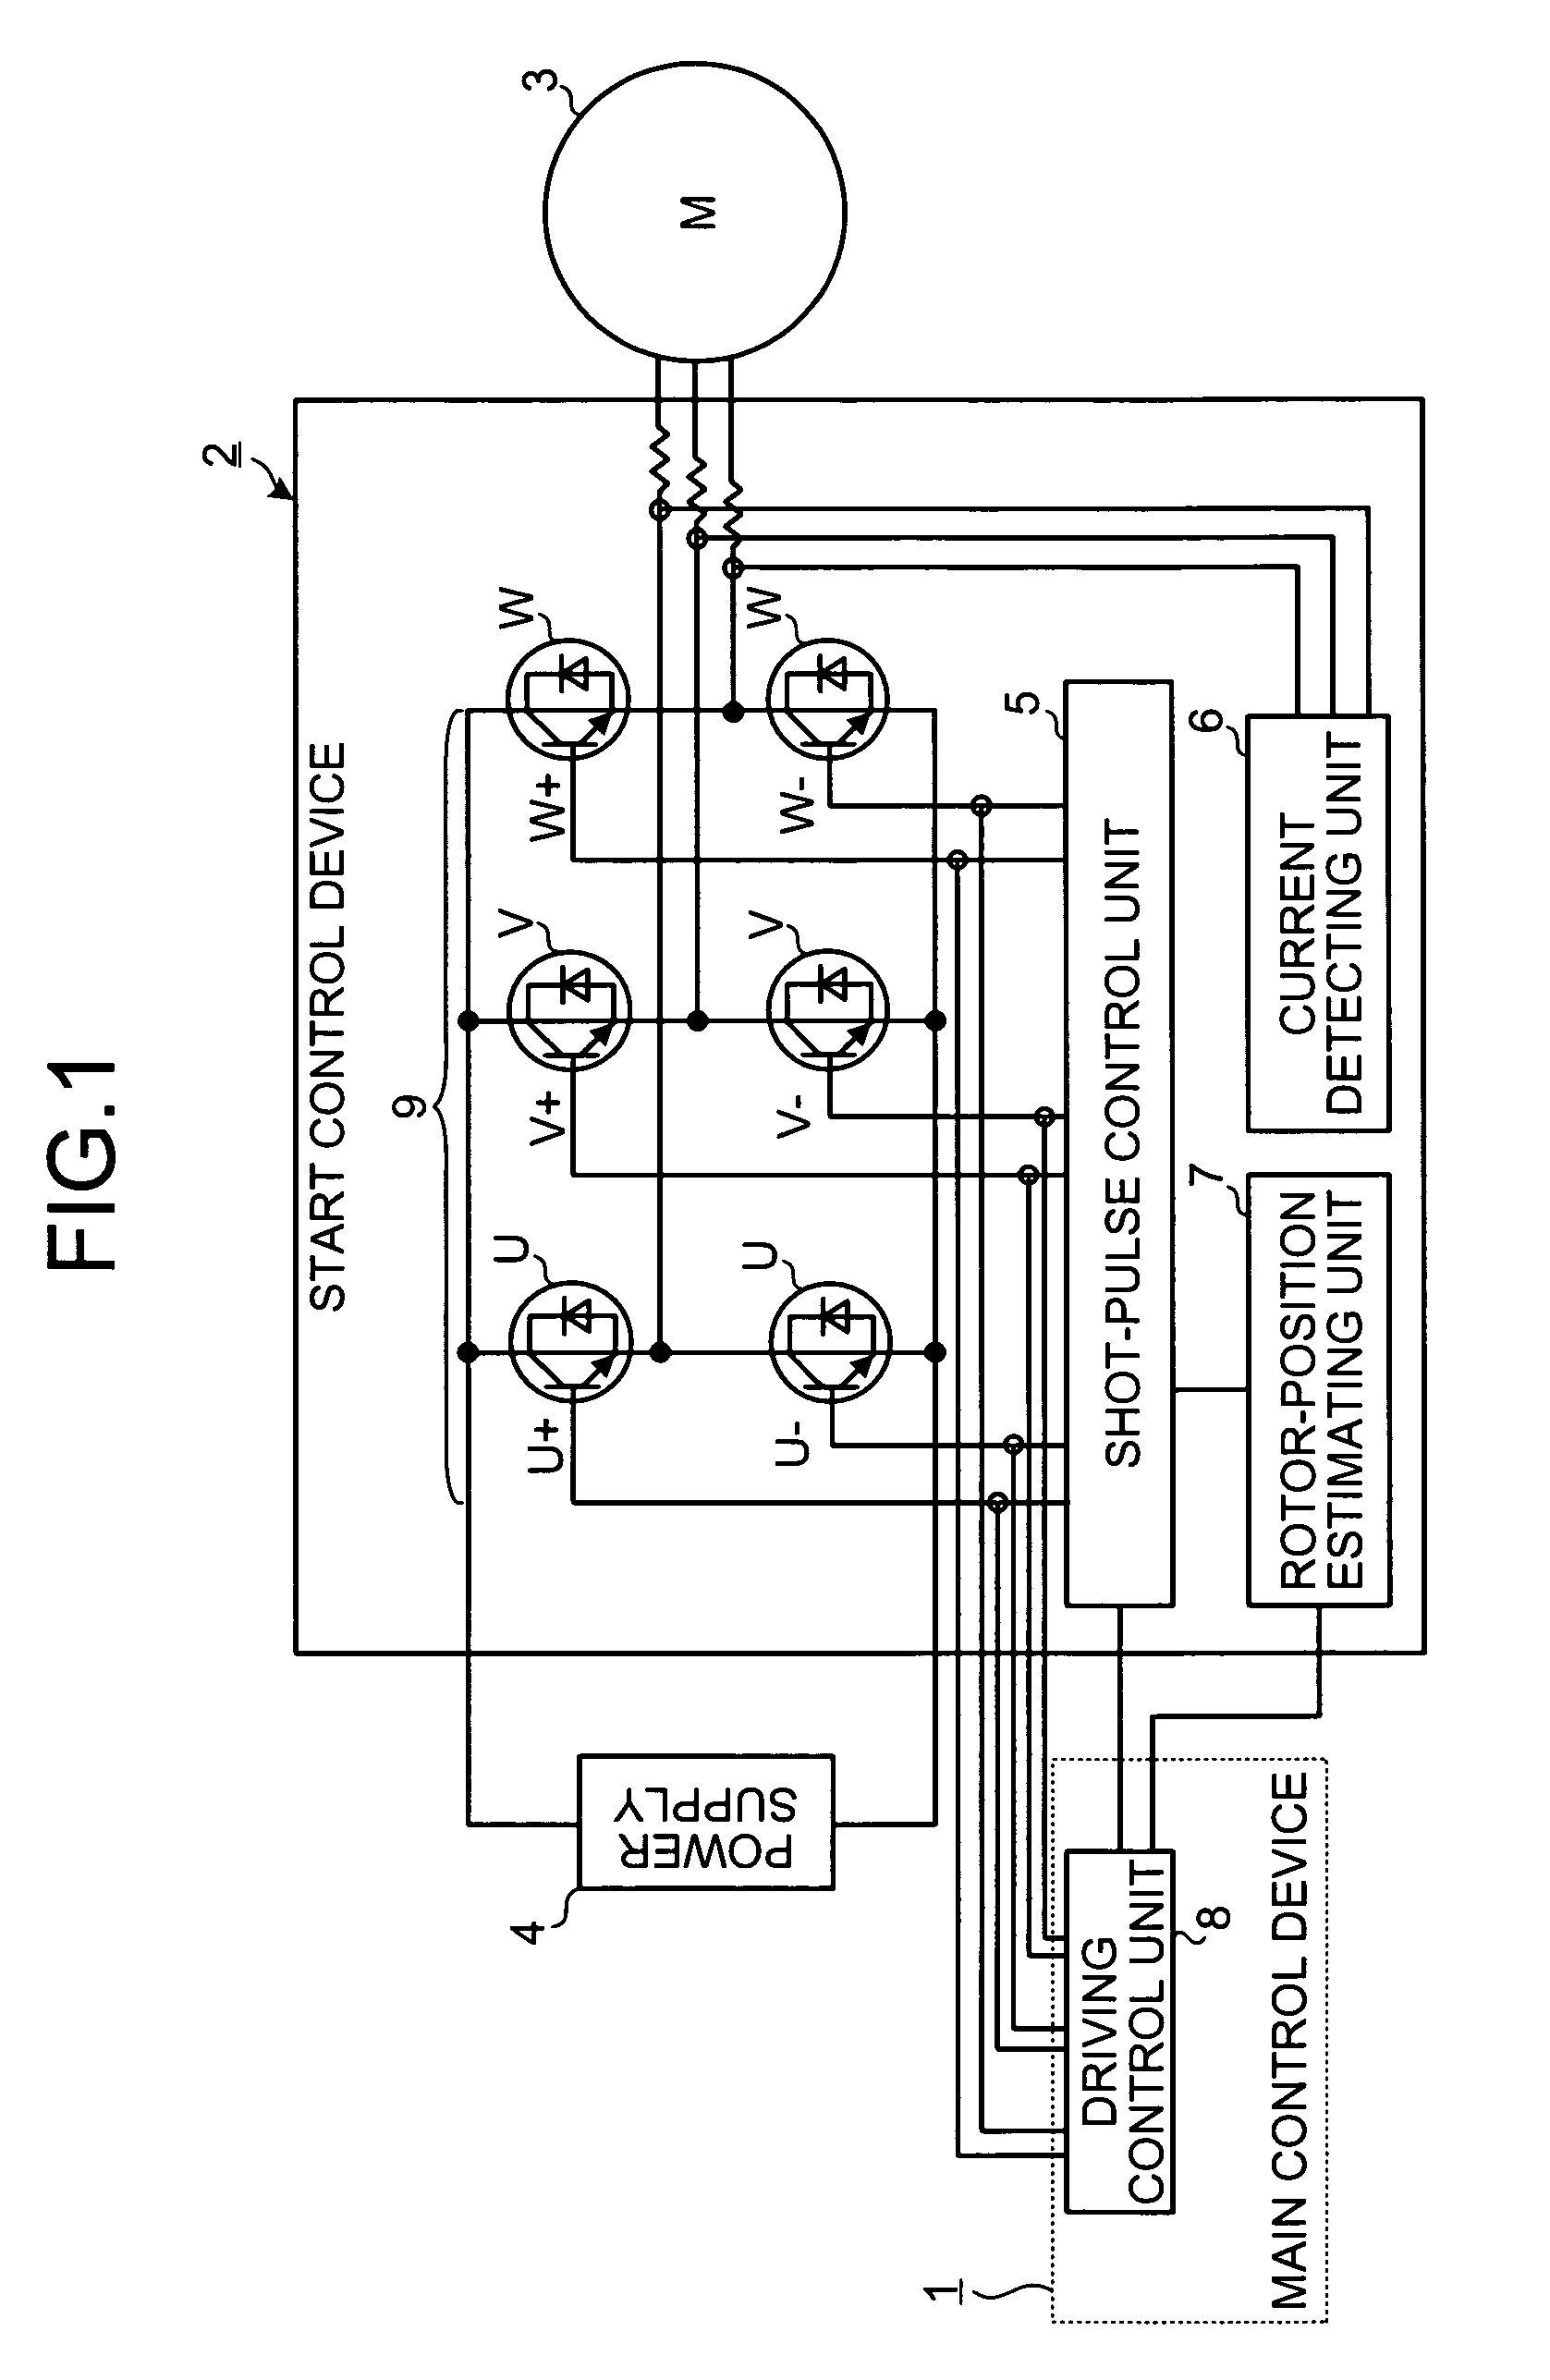 Control device for electric compressor